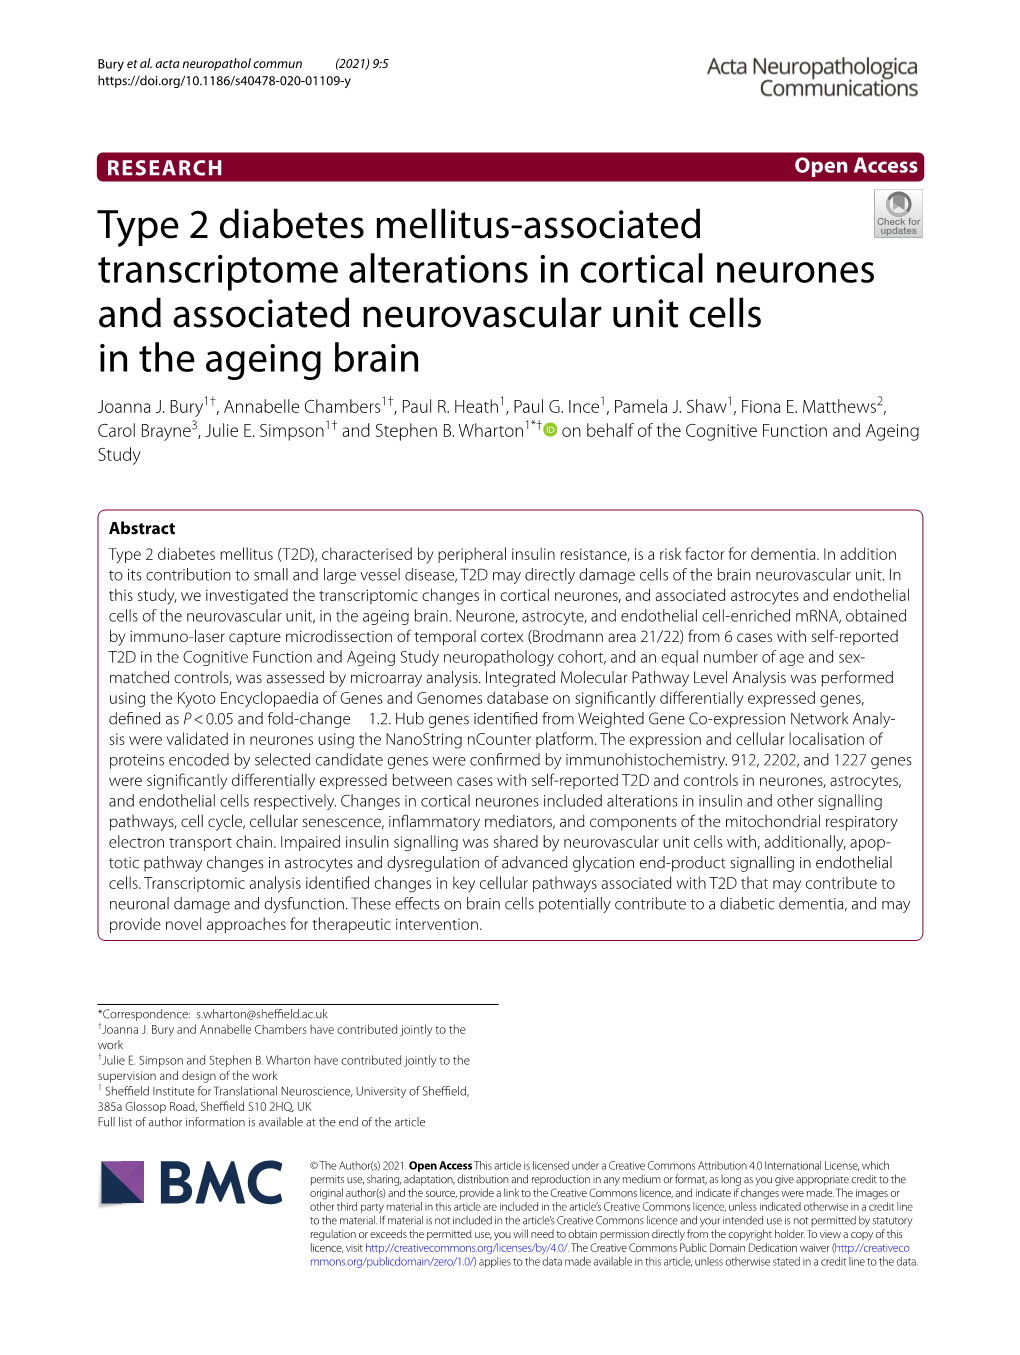 Type 2 Diabetes Mellitus-Associated Transcriptome Alterations in Cortical